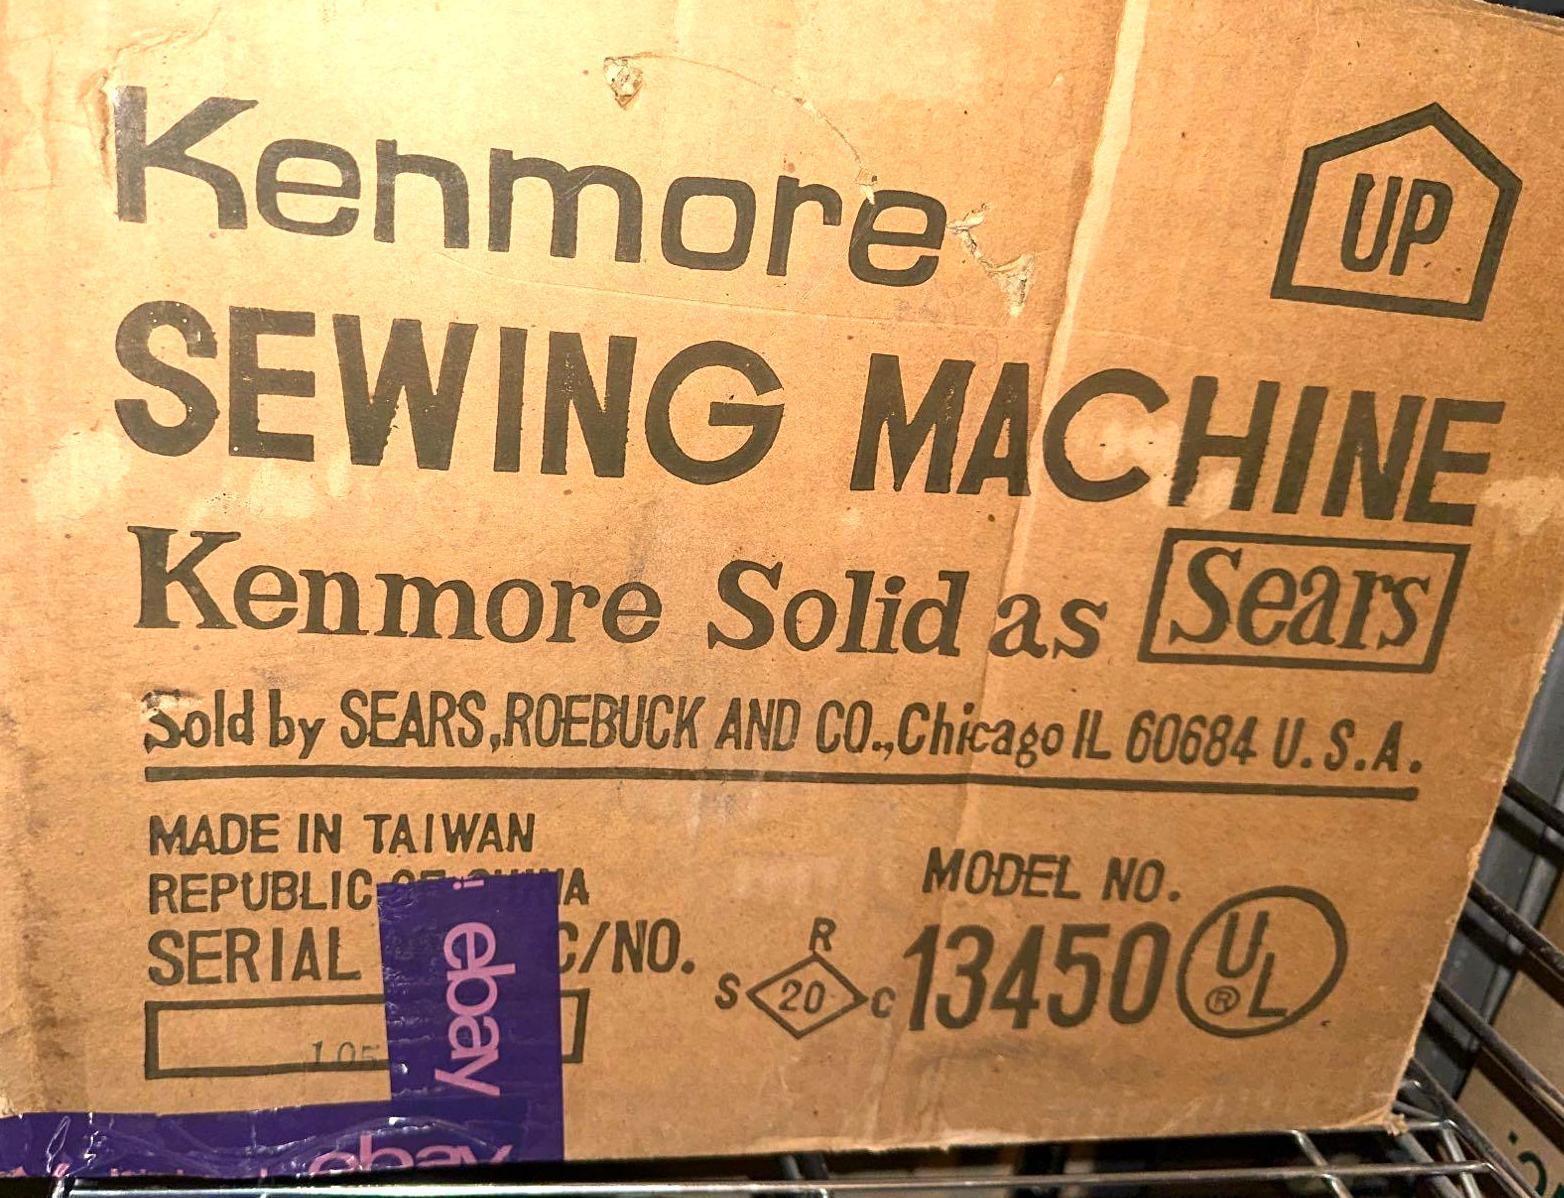 Kenmore 8 Stitch Sewing Machine #13450 - Works Great